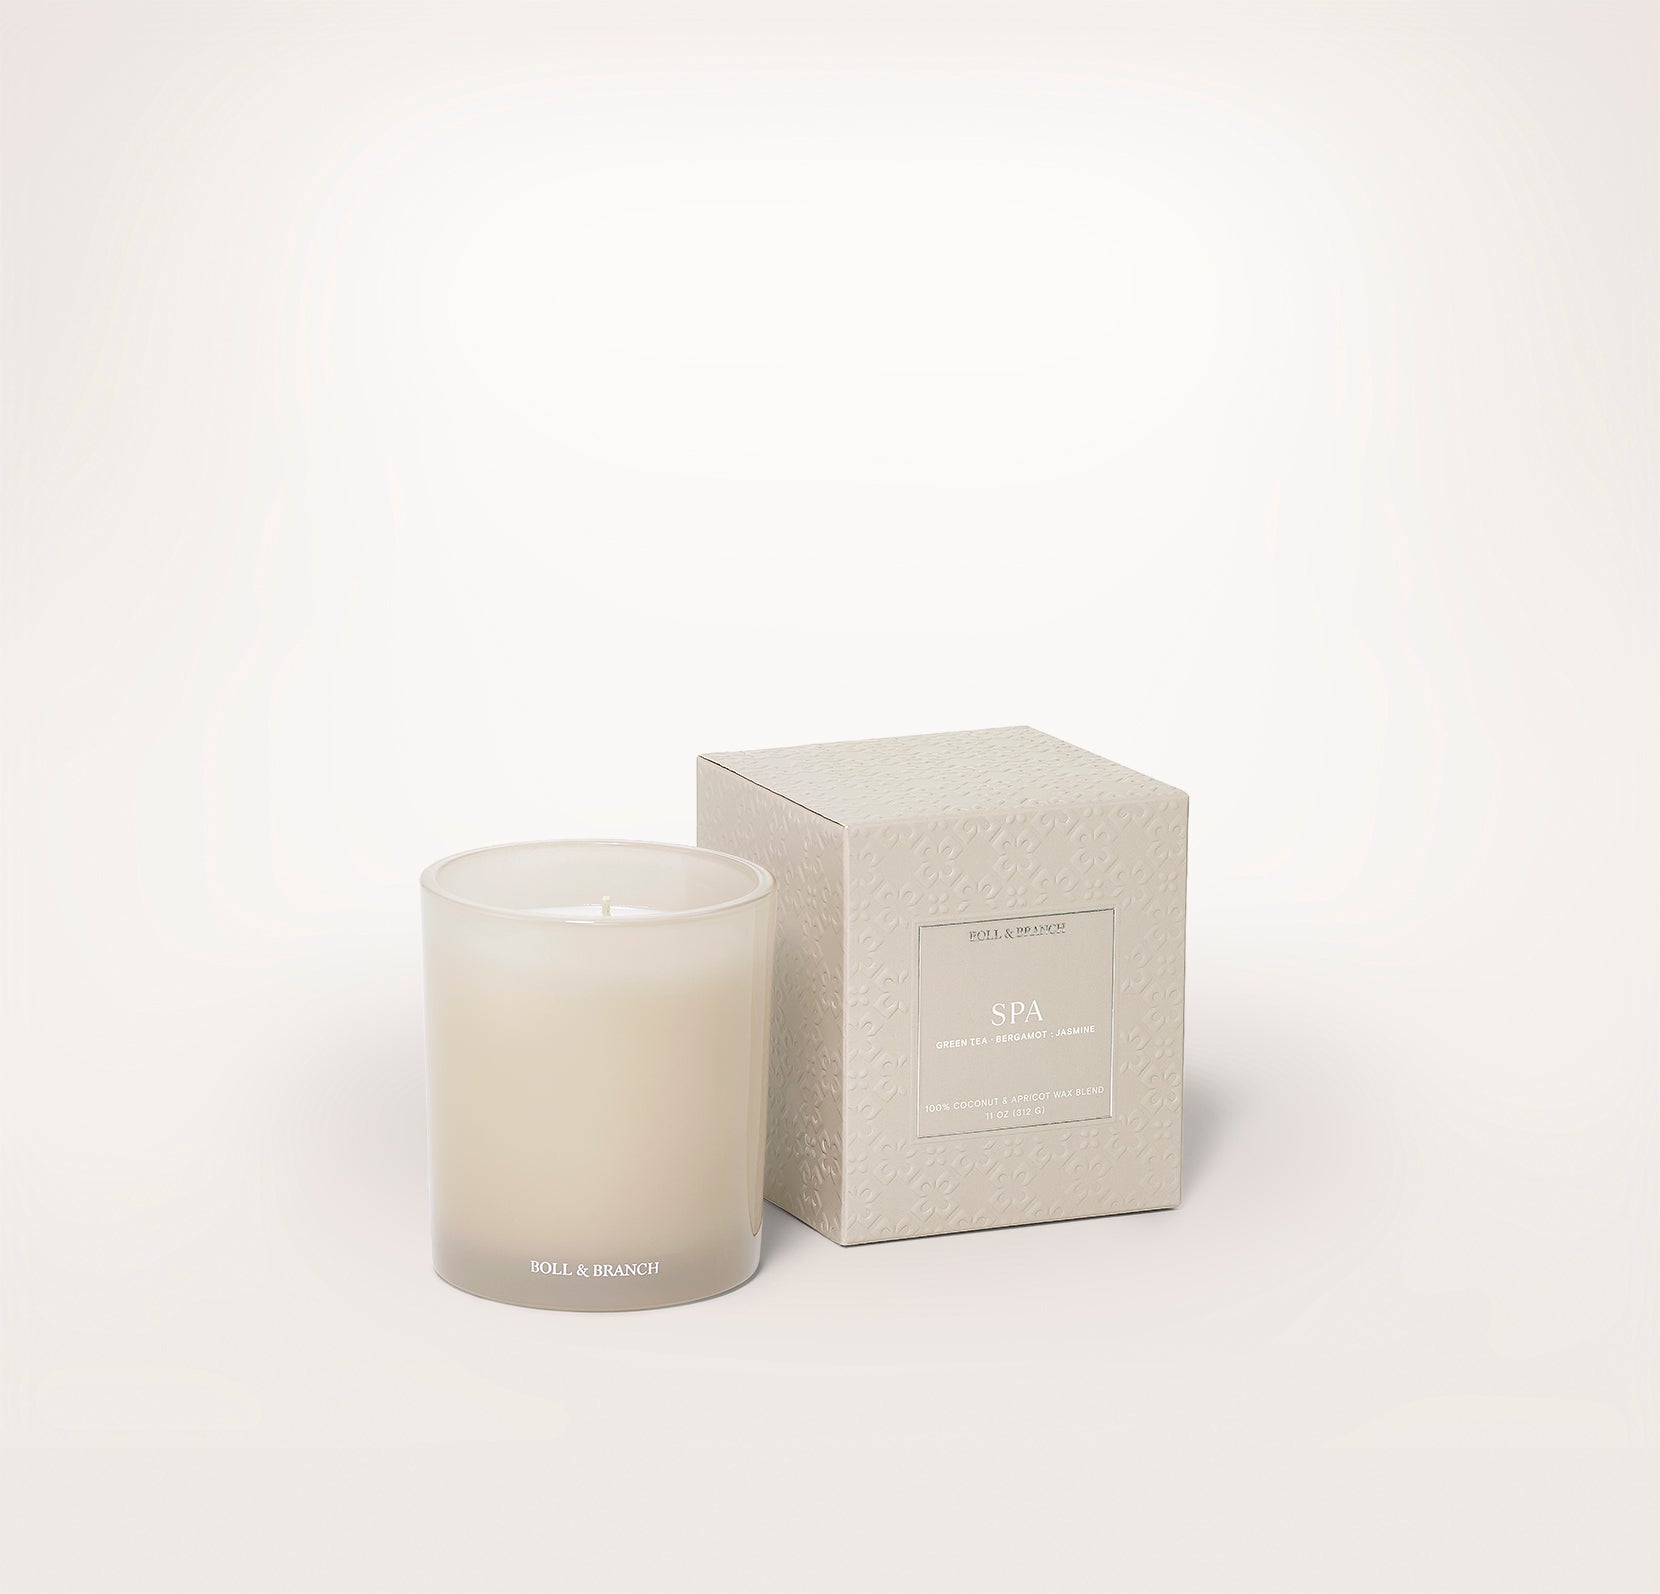 JULIA TEST - Single Wick Candle in Home